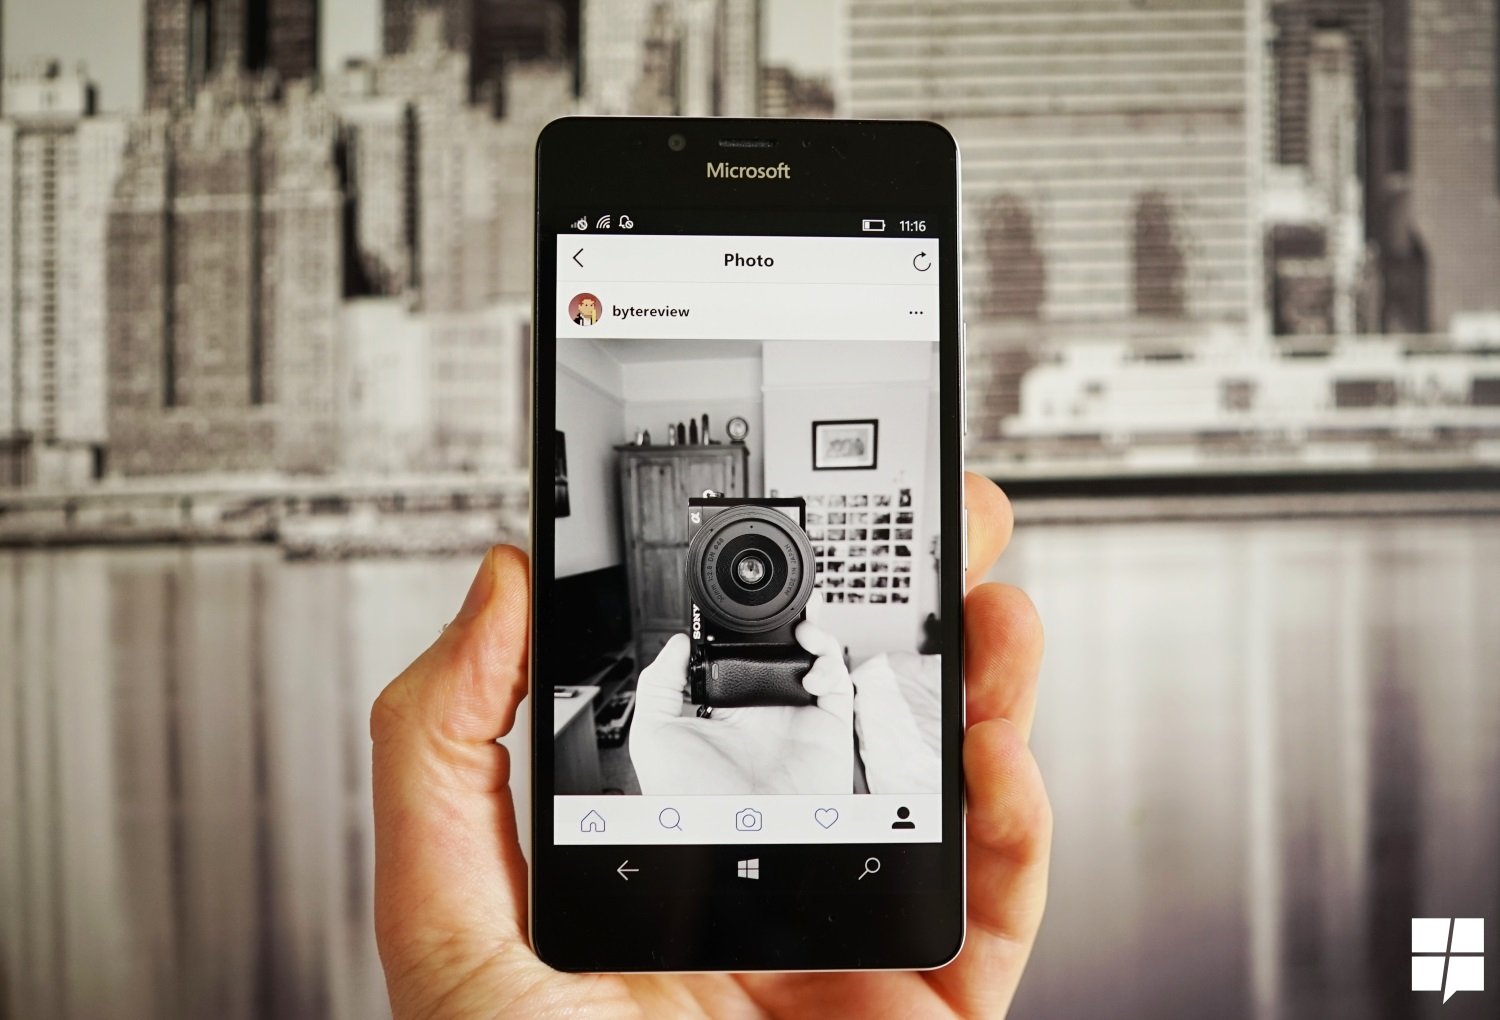 Instagram for Windows 10 updated with the ability to view multiple photos in a single post